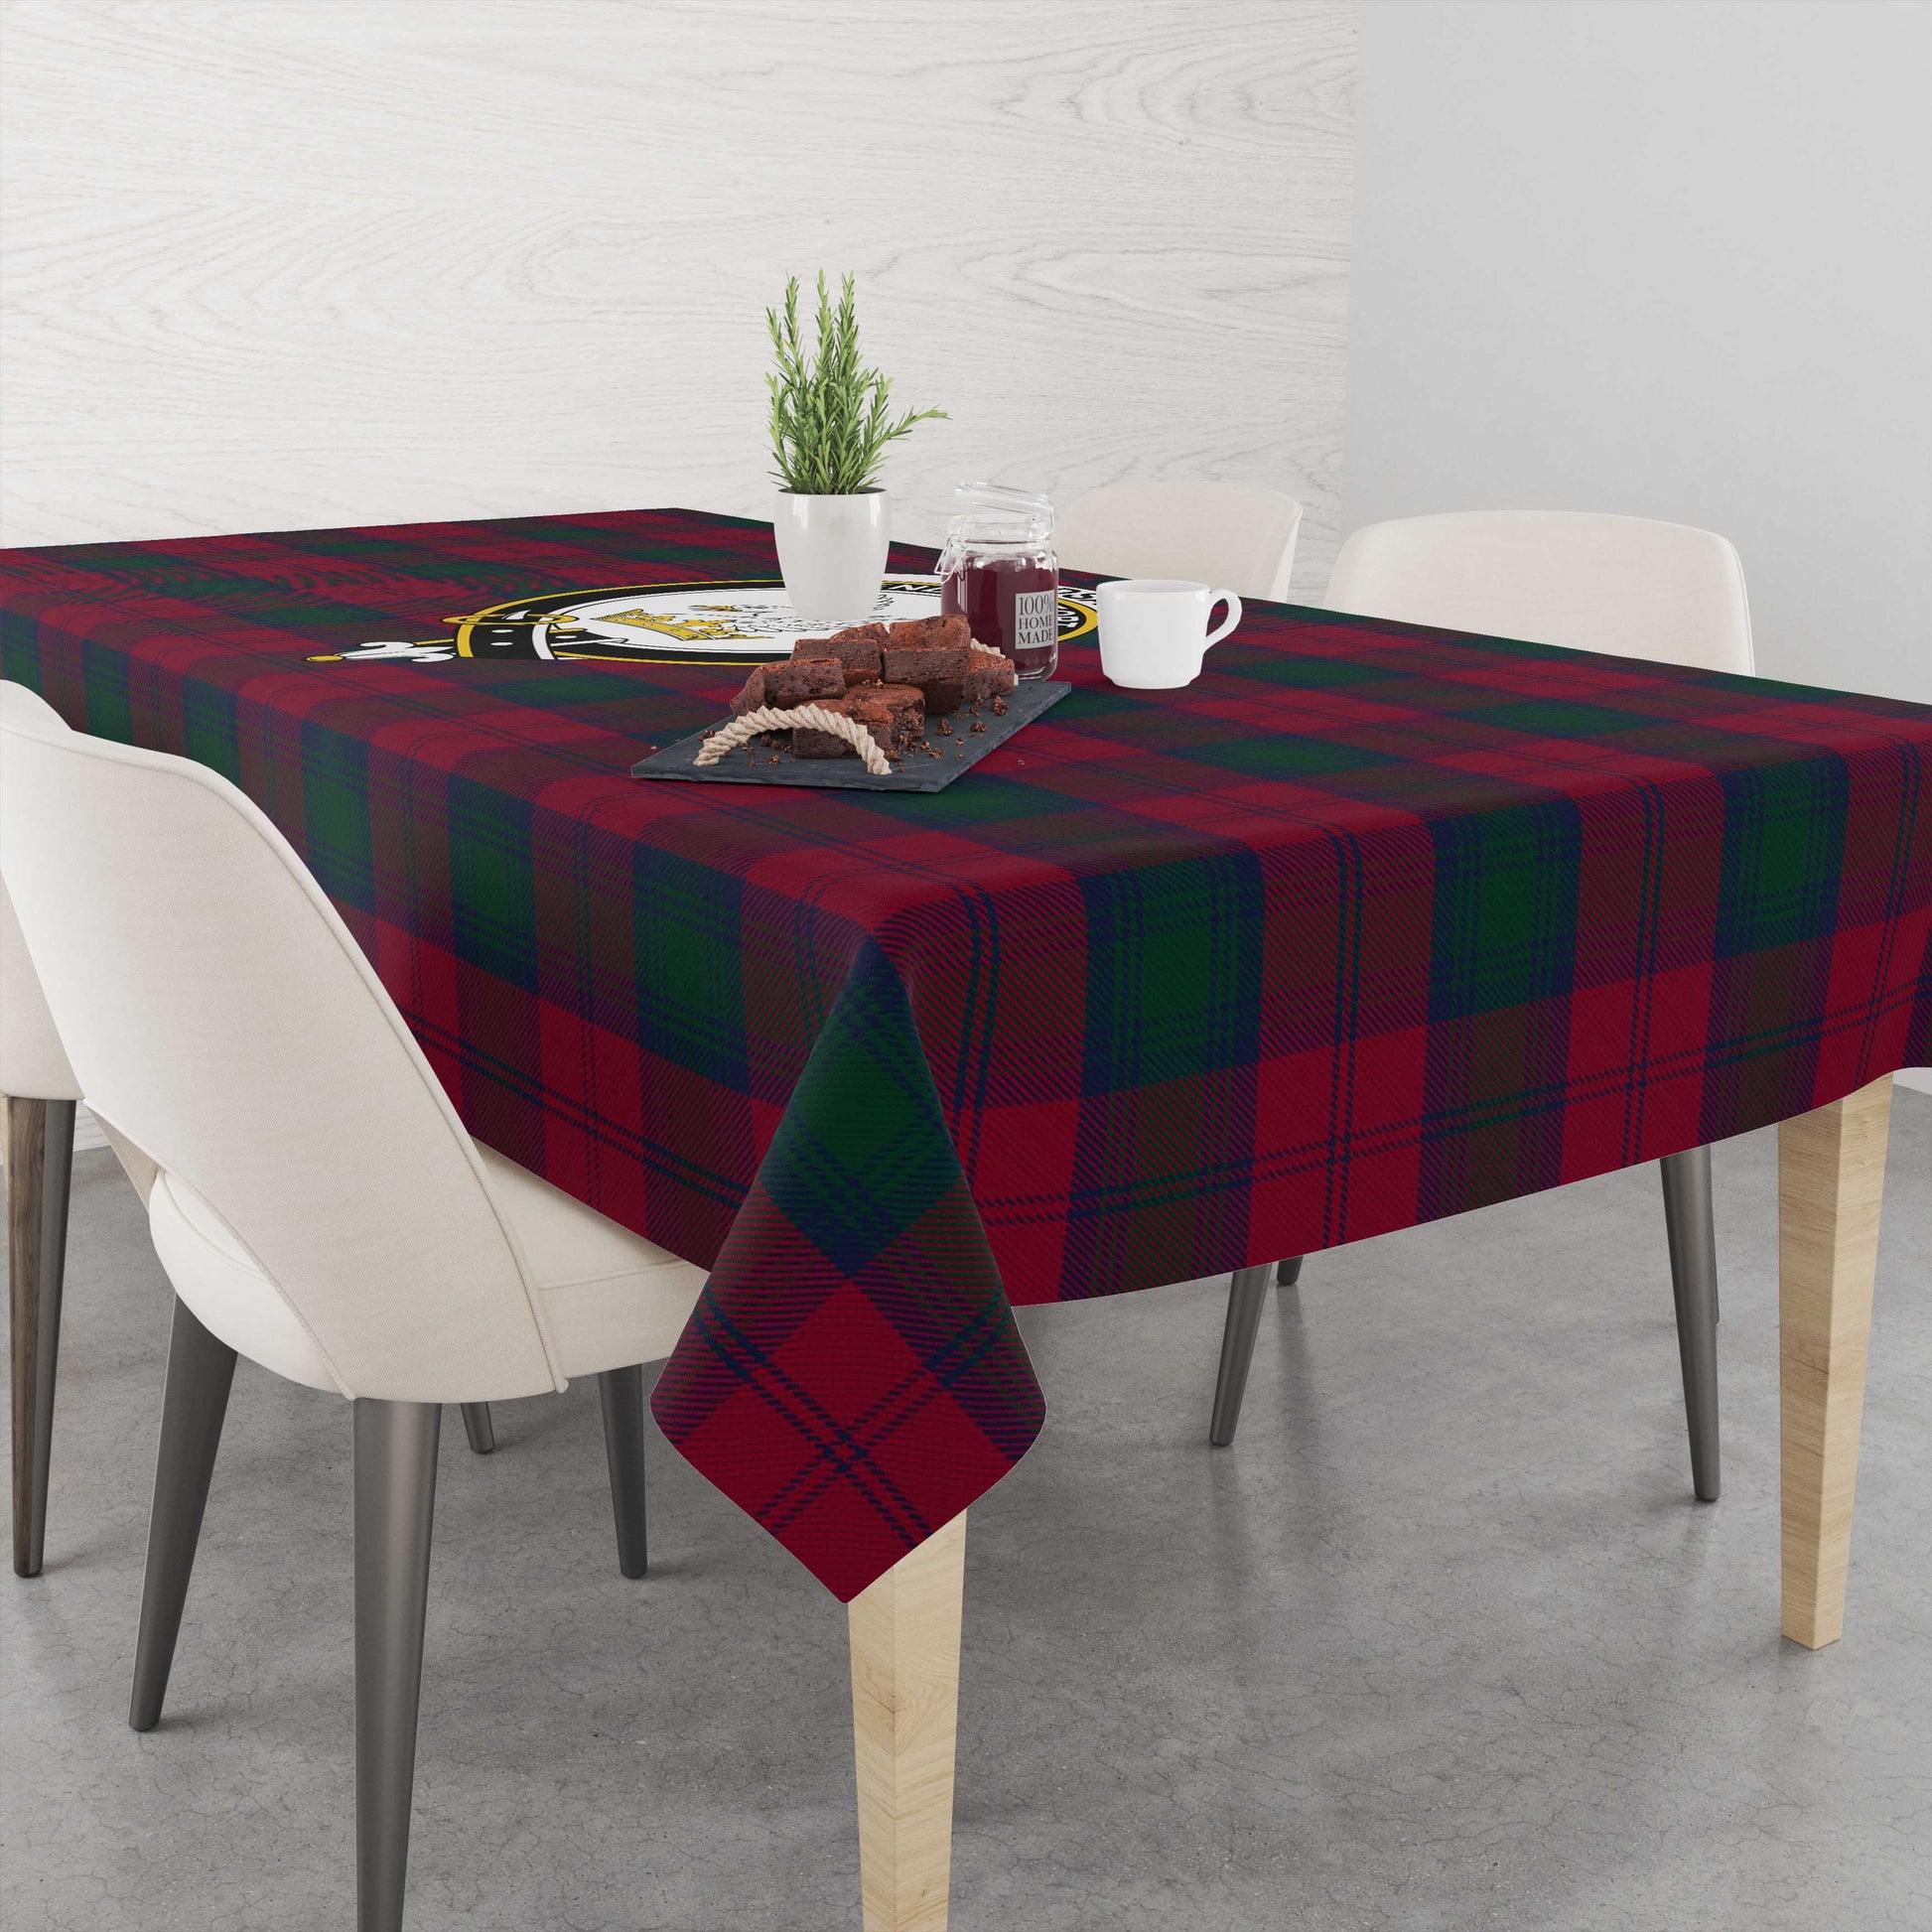 lindsay-tatan-tablecloth-with-family-crest